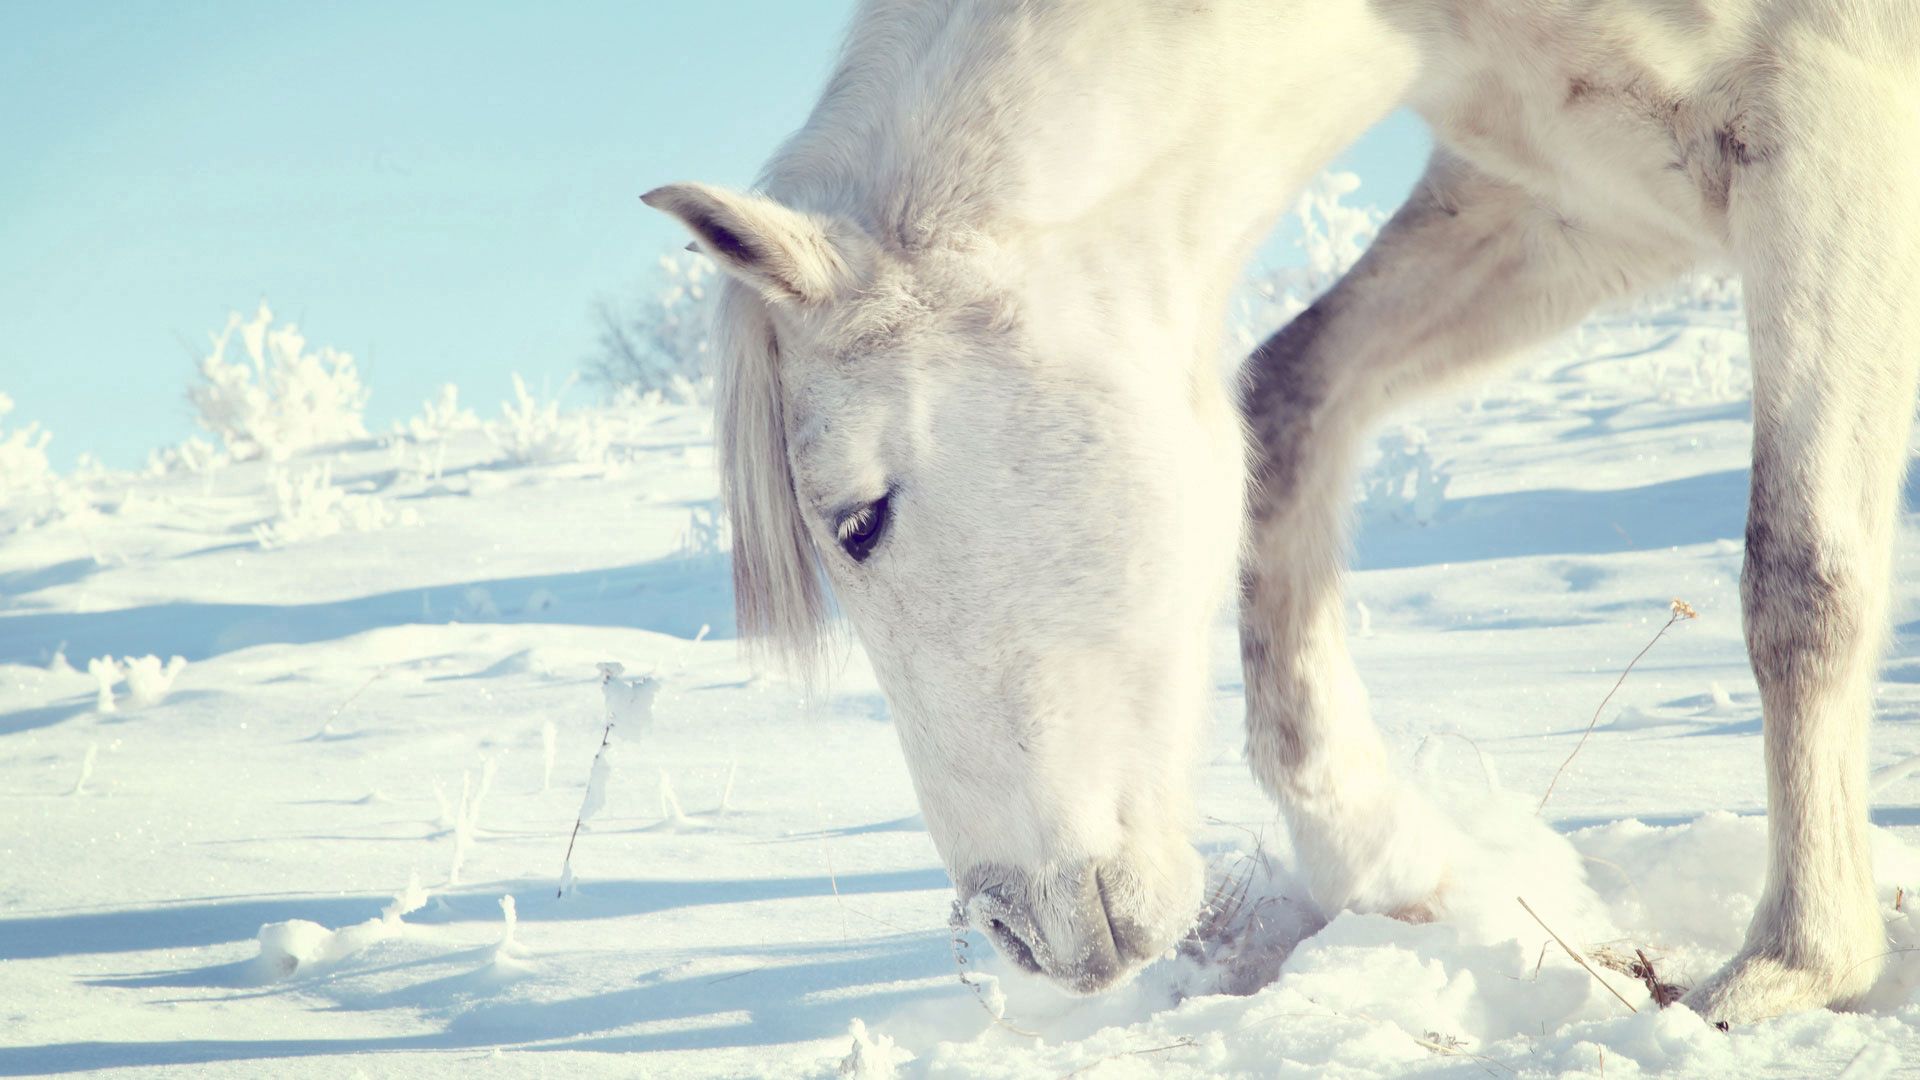 146895 download wallpaper animals, winter, snow, bush, head, horse screensavers and pictures for free